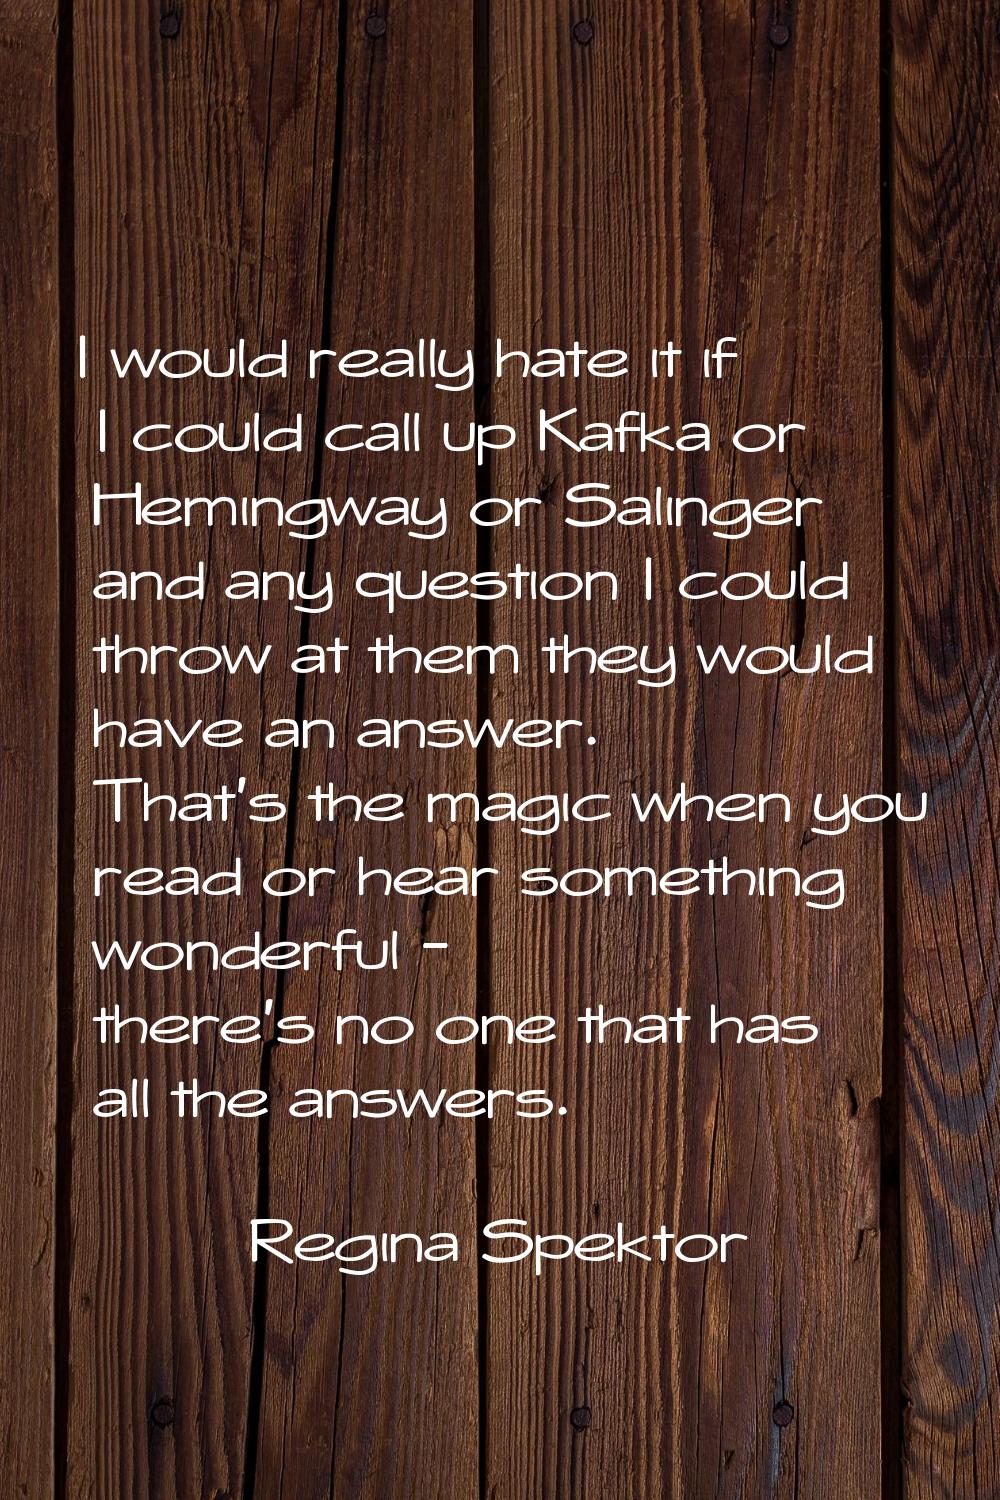 I would really hate it if I could call up Kafka or Hemingway or Salinger and any question I could t